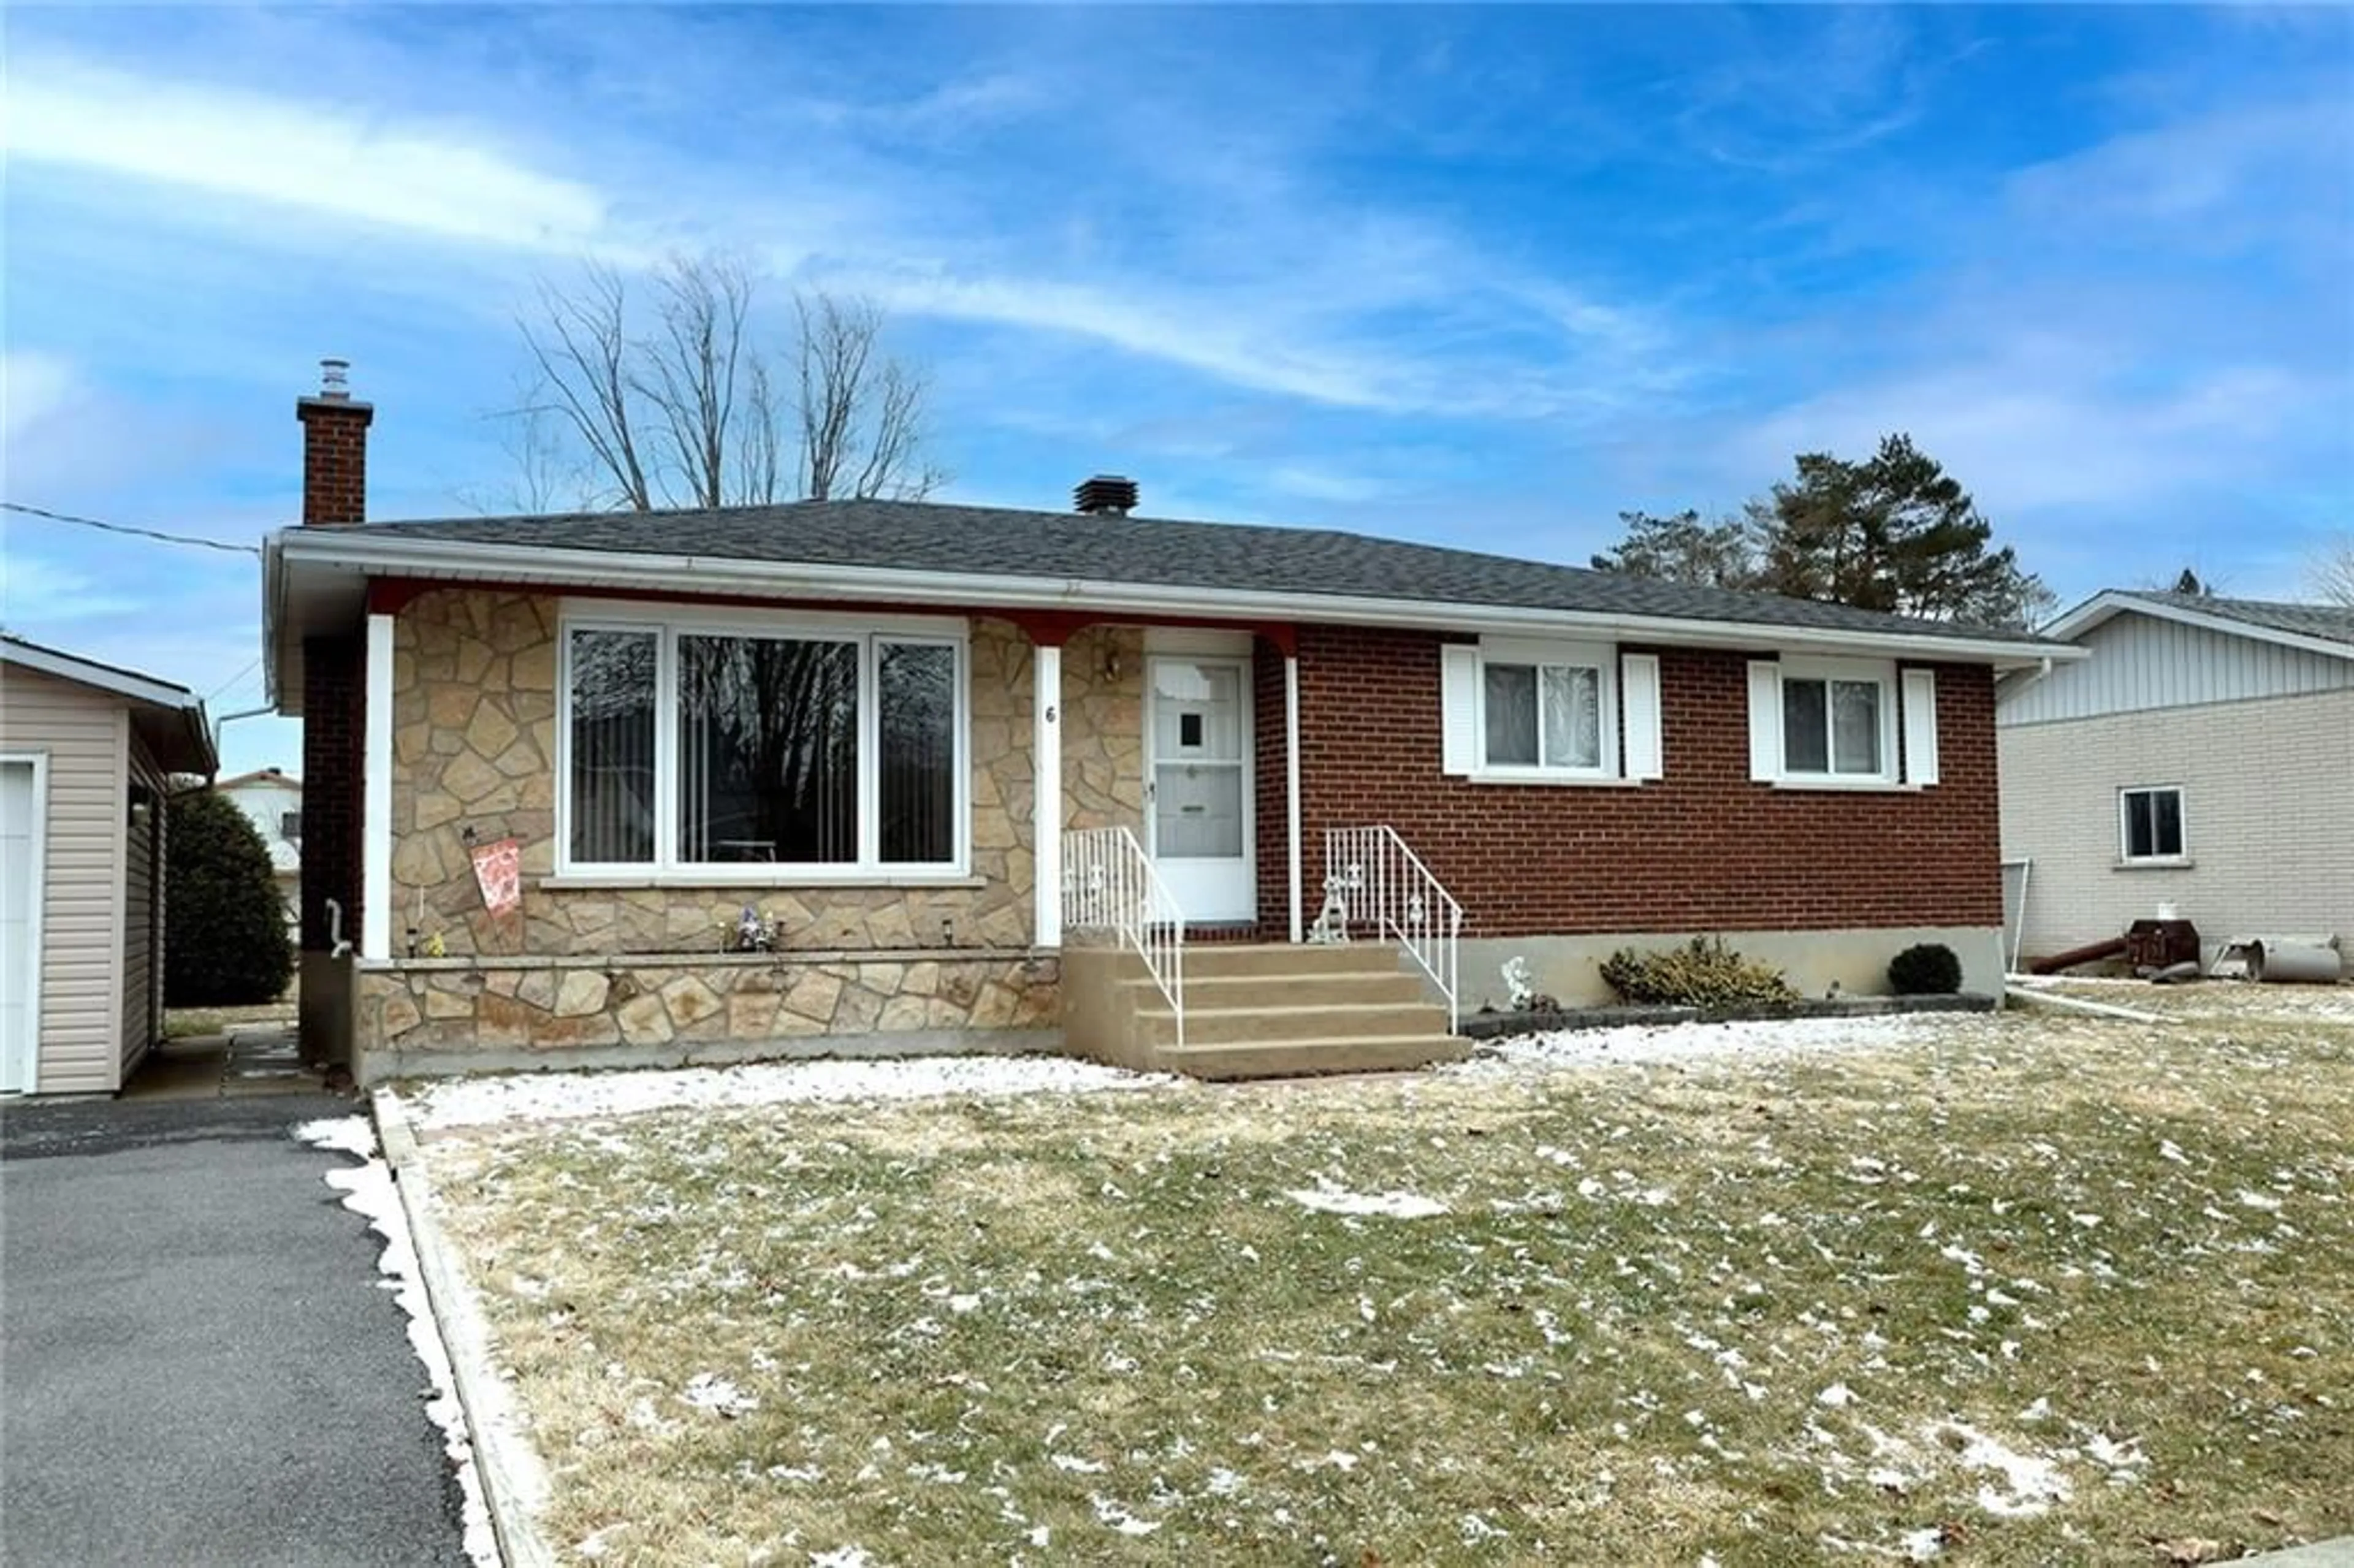 Home with brick exterior material for 6 PINE St, Ingleside Ontario K0C 1M0